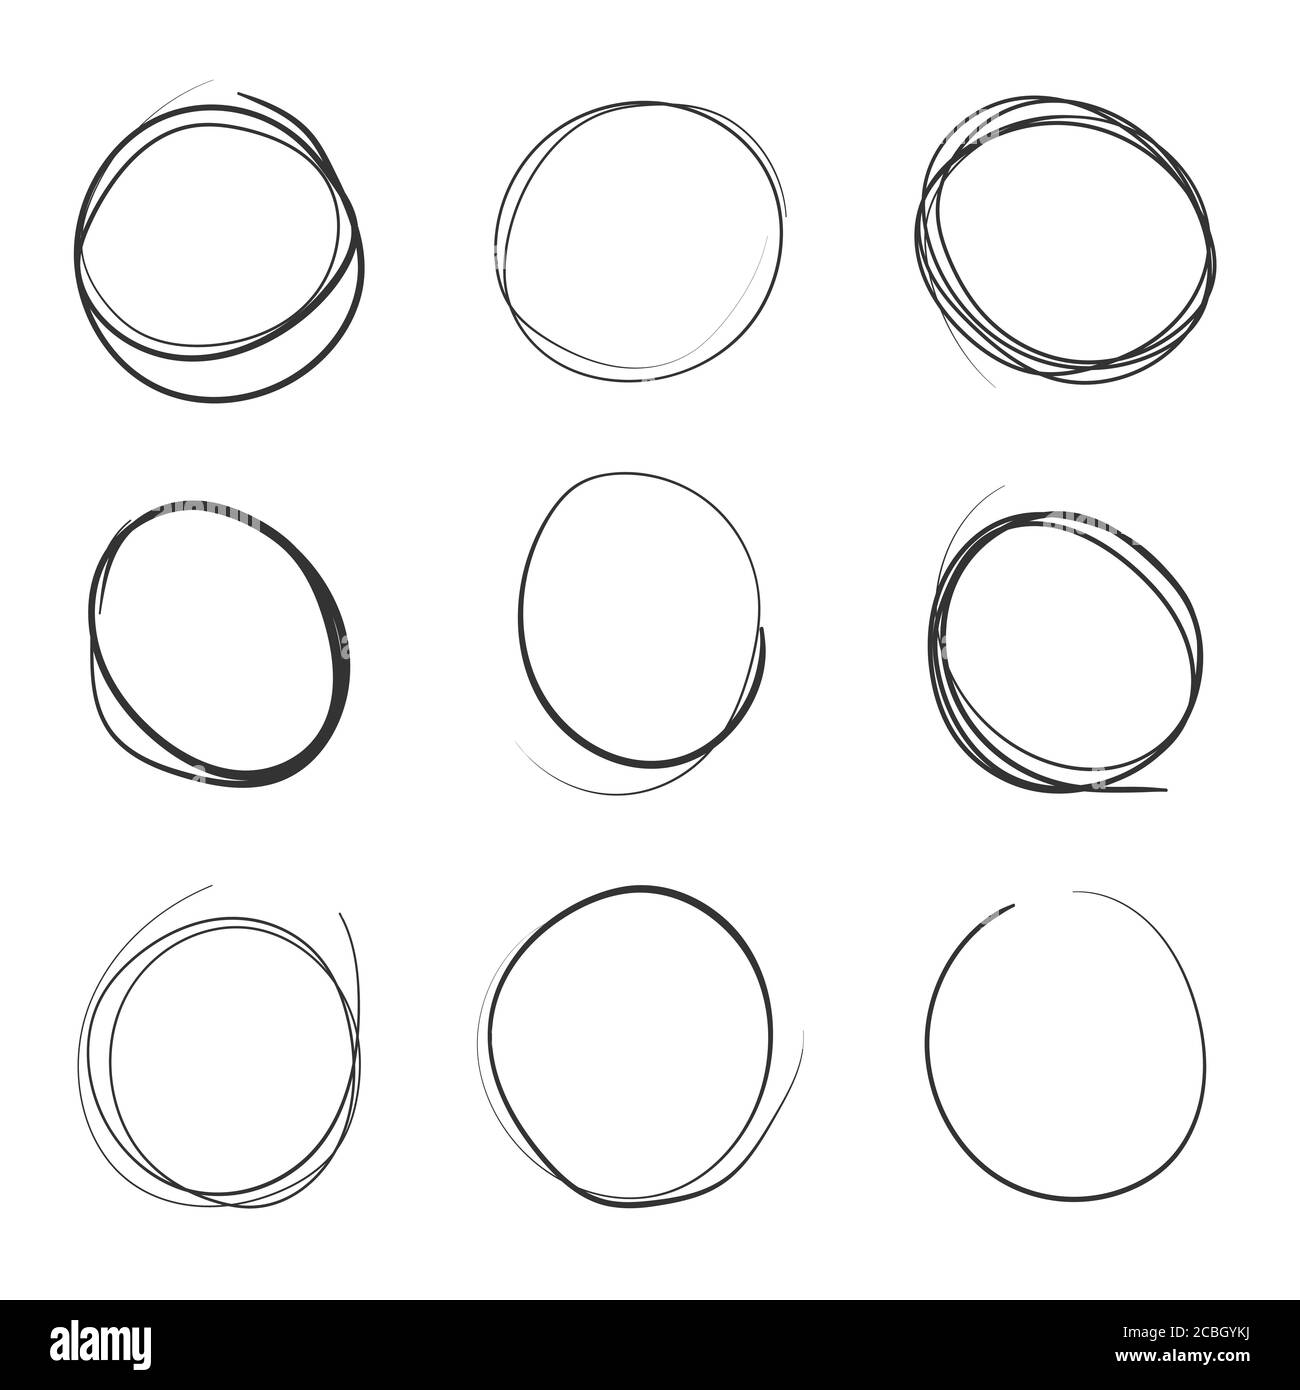 Doodle hand drawn circle line sketch set. Pencil or pen round circular elements for message note mark design. Stock Vector